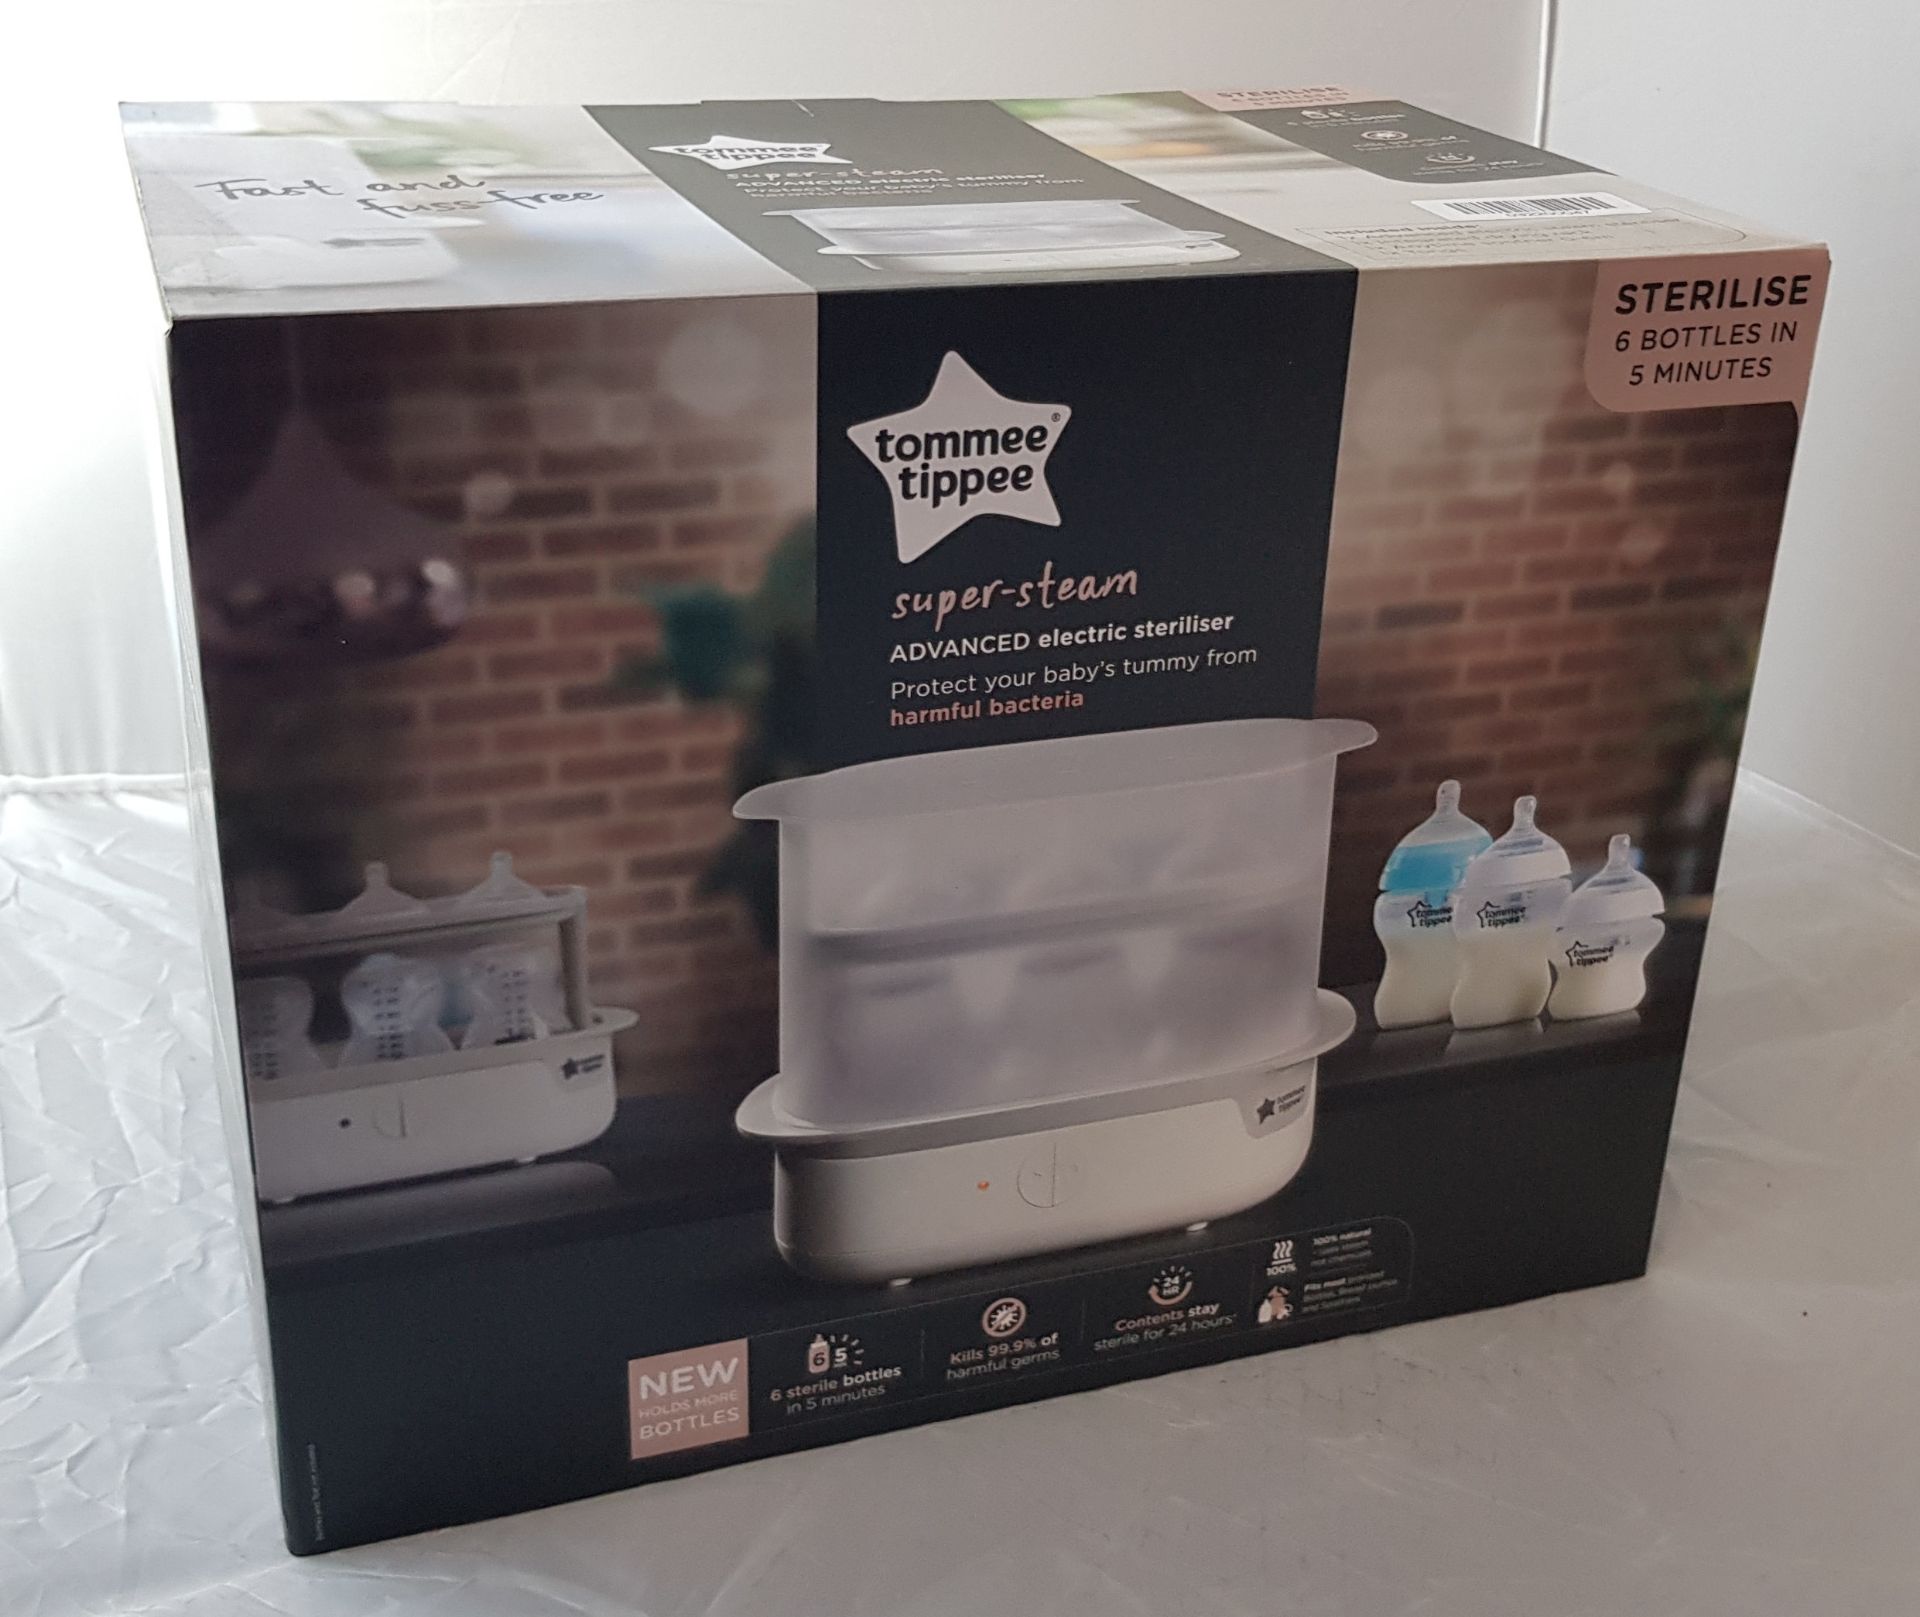 Tommee Tippee Super Steam Advanced Electric Steriliser. RRP £69.99. New, Sealed Product. No Gu... - Image 2 of 2